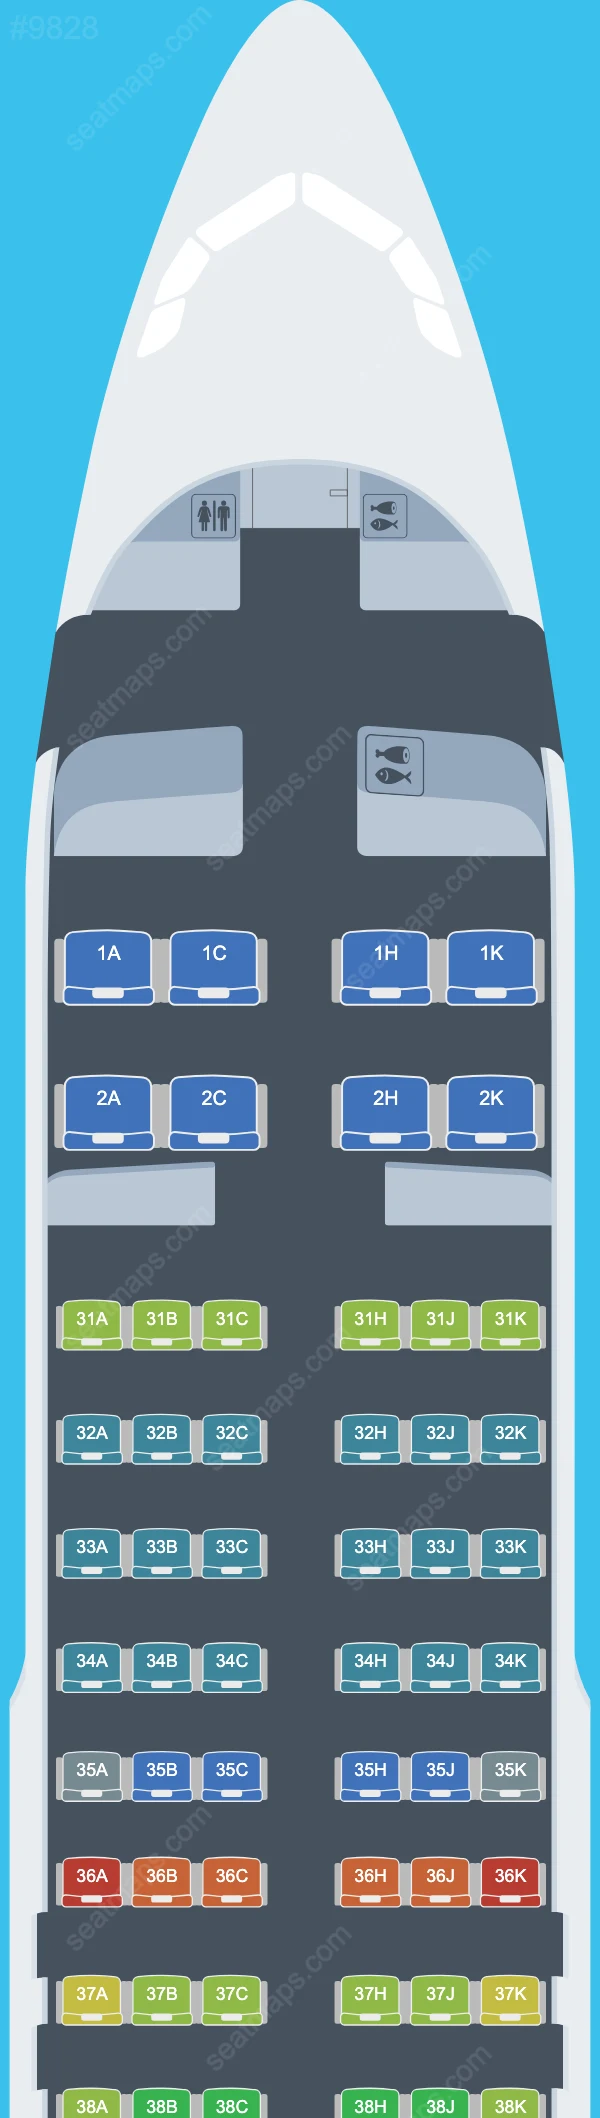 China Southern Airbus A320 Seat Maps A320-200 V.2